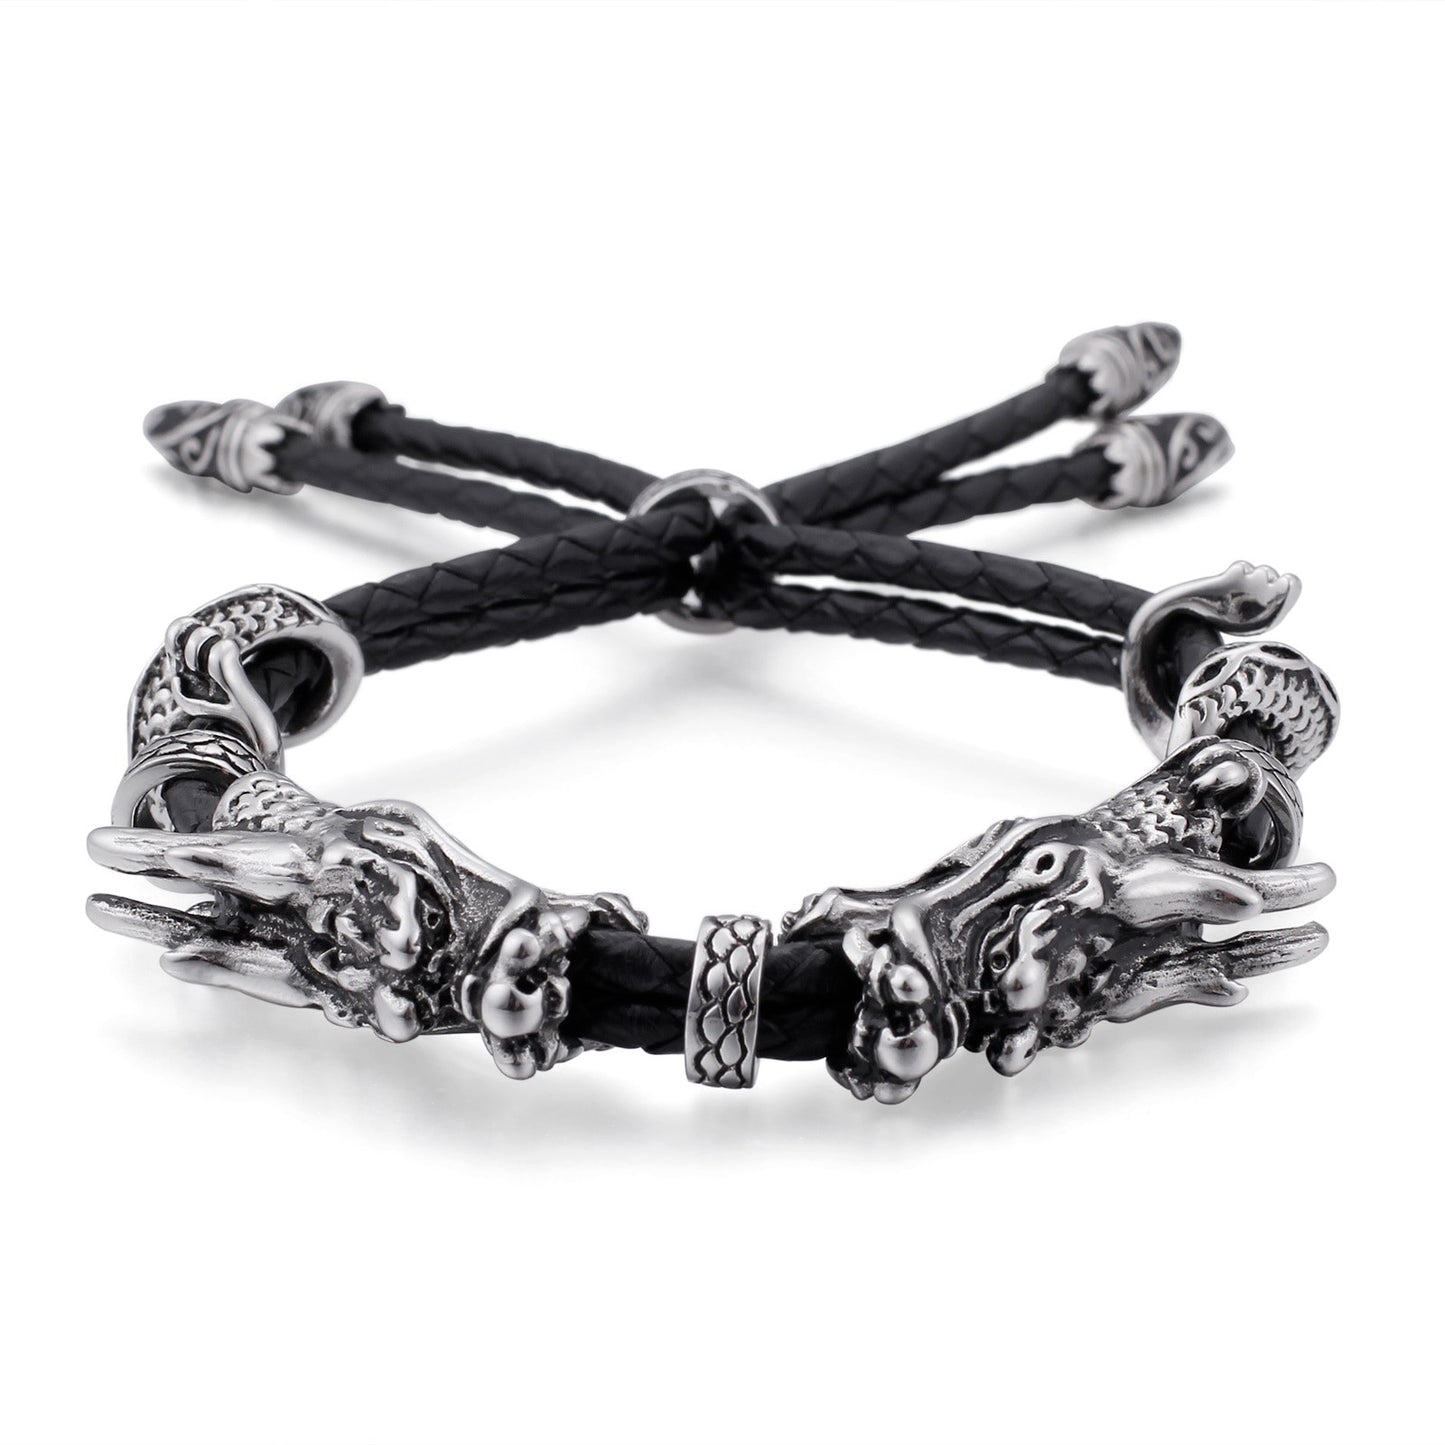 Stainless Steel Men Dragon Bracelet Interwoven with Black Genuine Leather Rope Strap Adjustable Bangle Fashion Jewelry